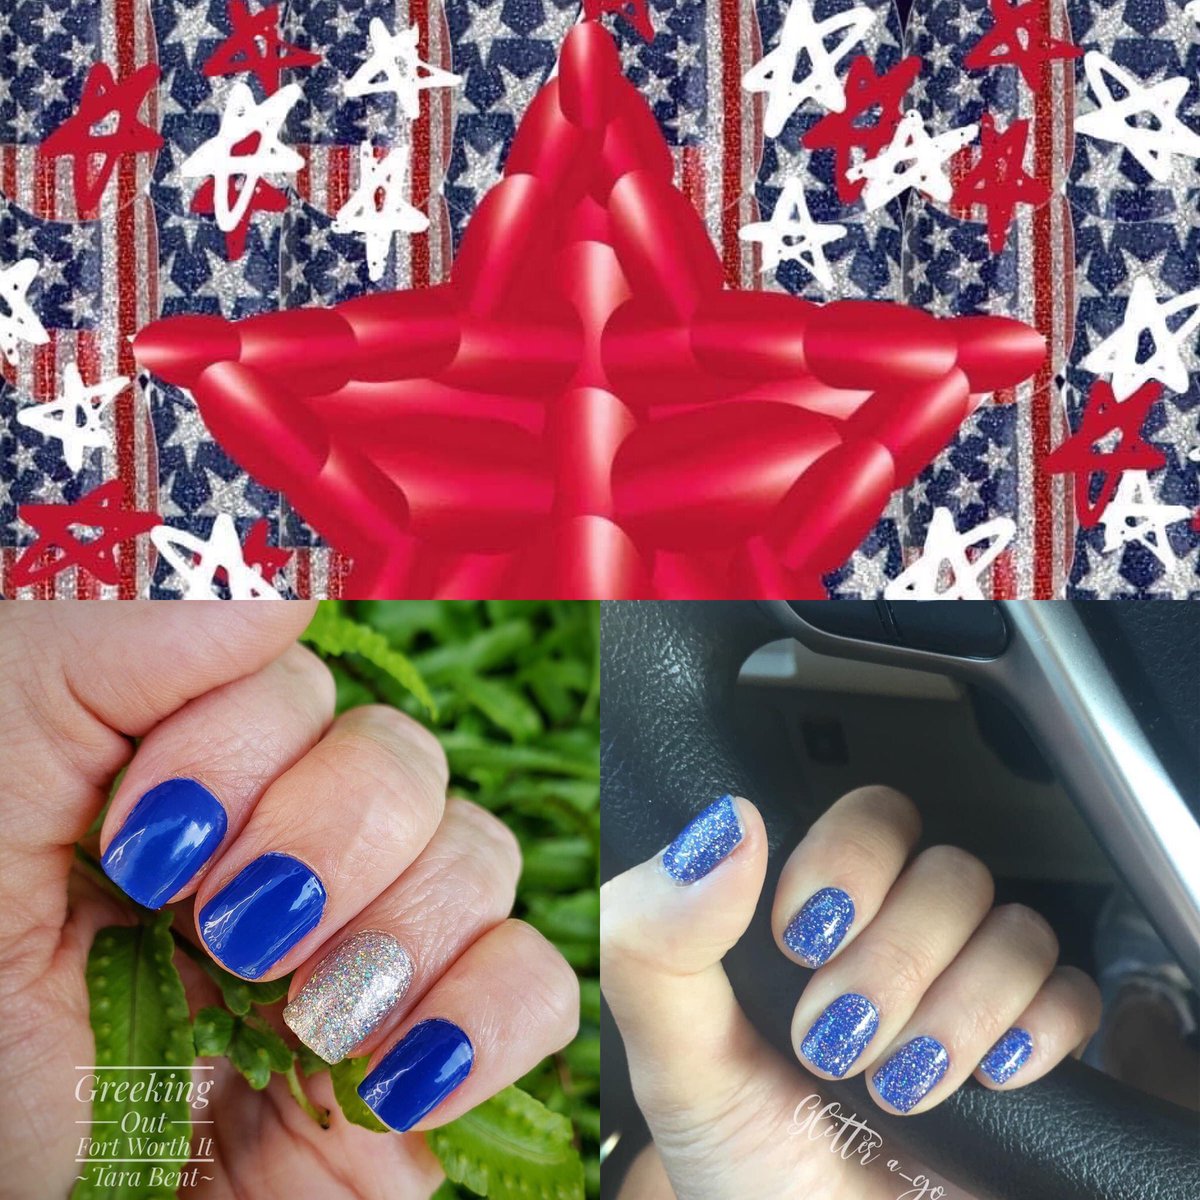 Did you miss the Patriotic Shades? 🇺🇸Use #greekingout #fortworthit or #Swissandtell to make a great mani or pedi! These are on the site and ready to buy! If you would like to order through me, DM me! #colorstreet #colorstreetnails #4thofJuly #nails #nailsnailsnails #usa #mani